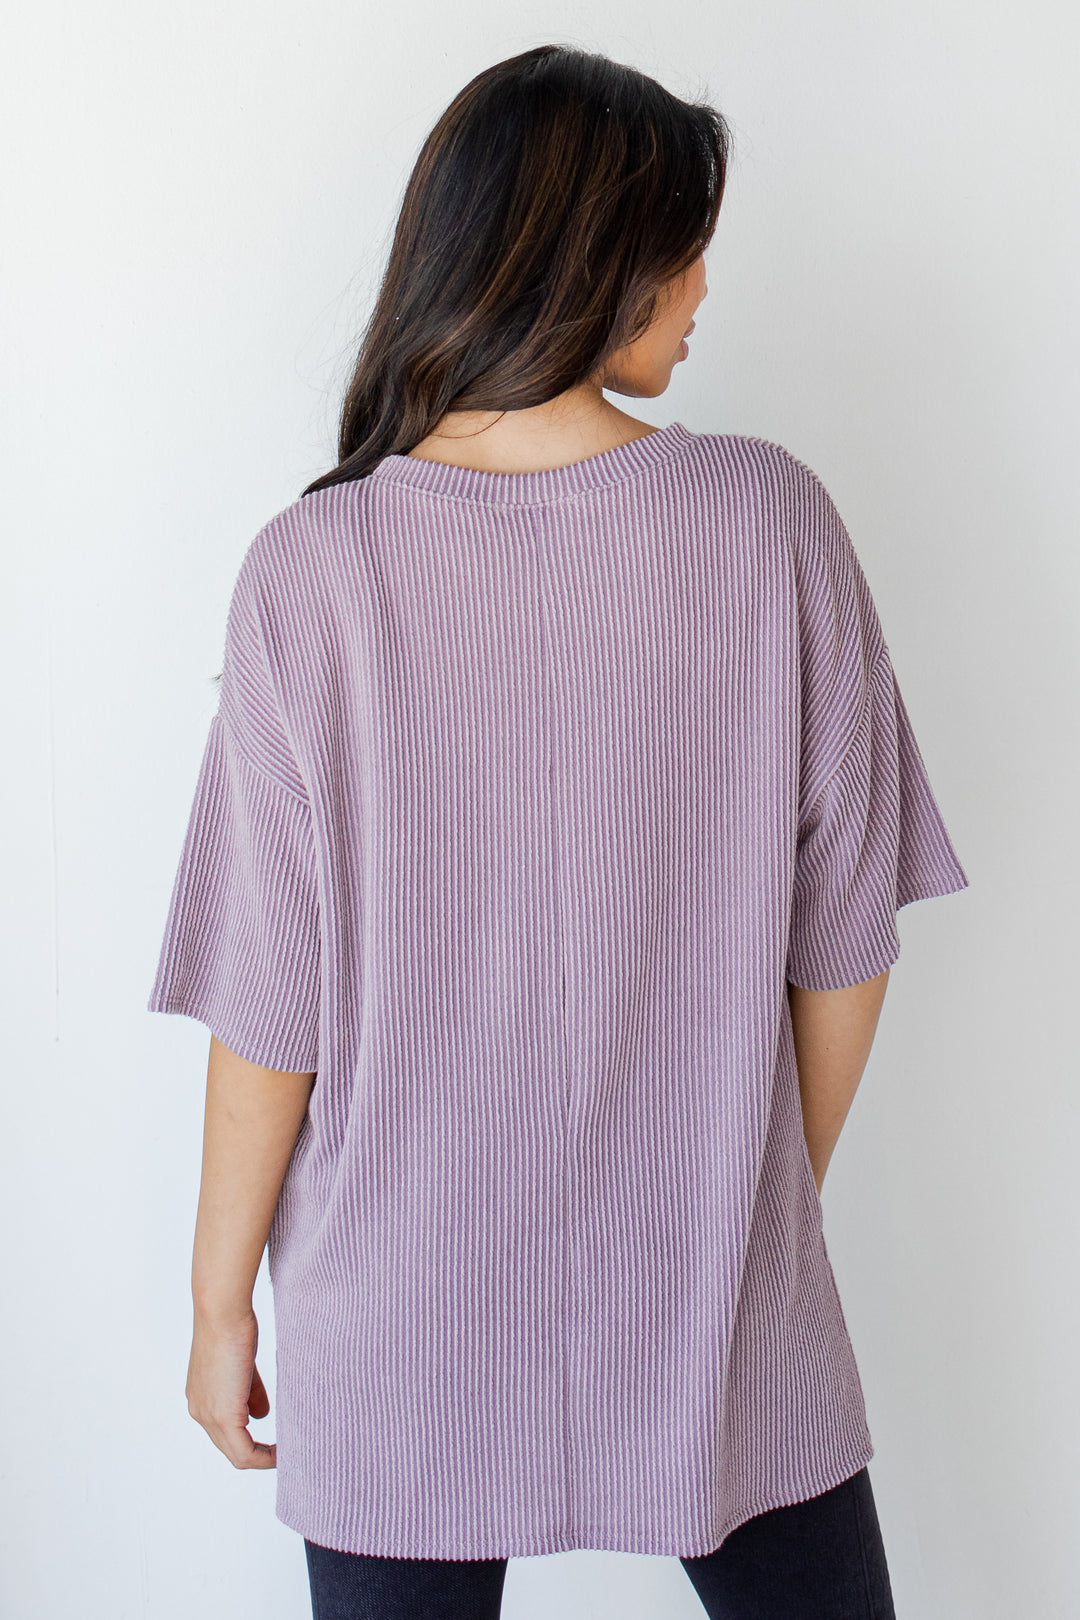 Corded Tee back view